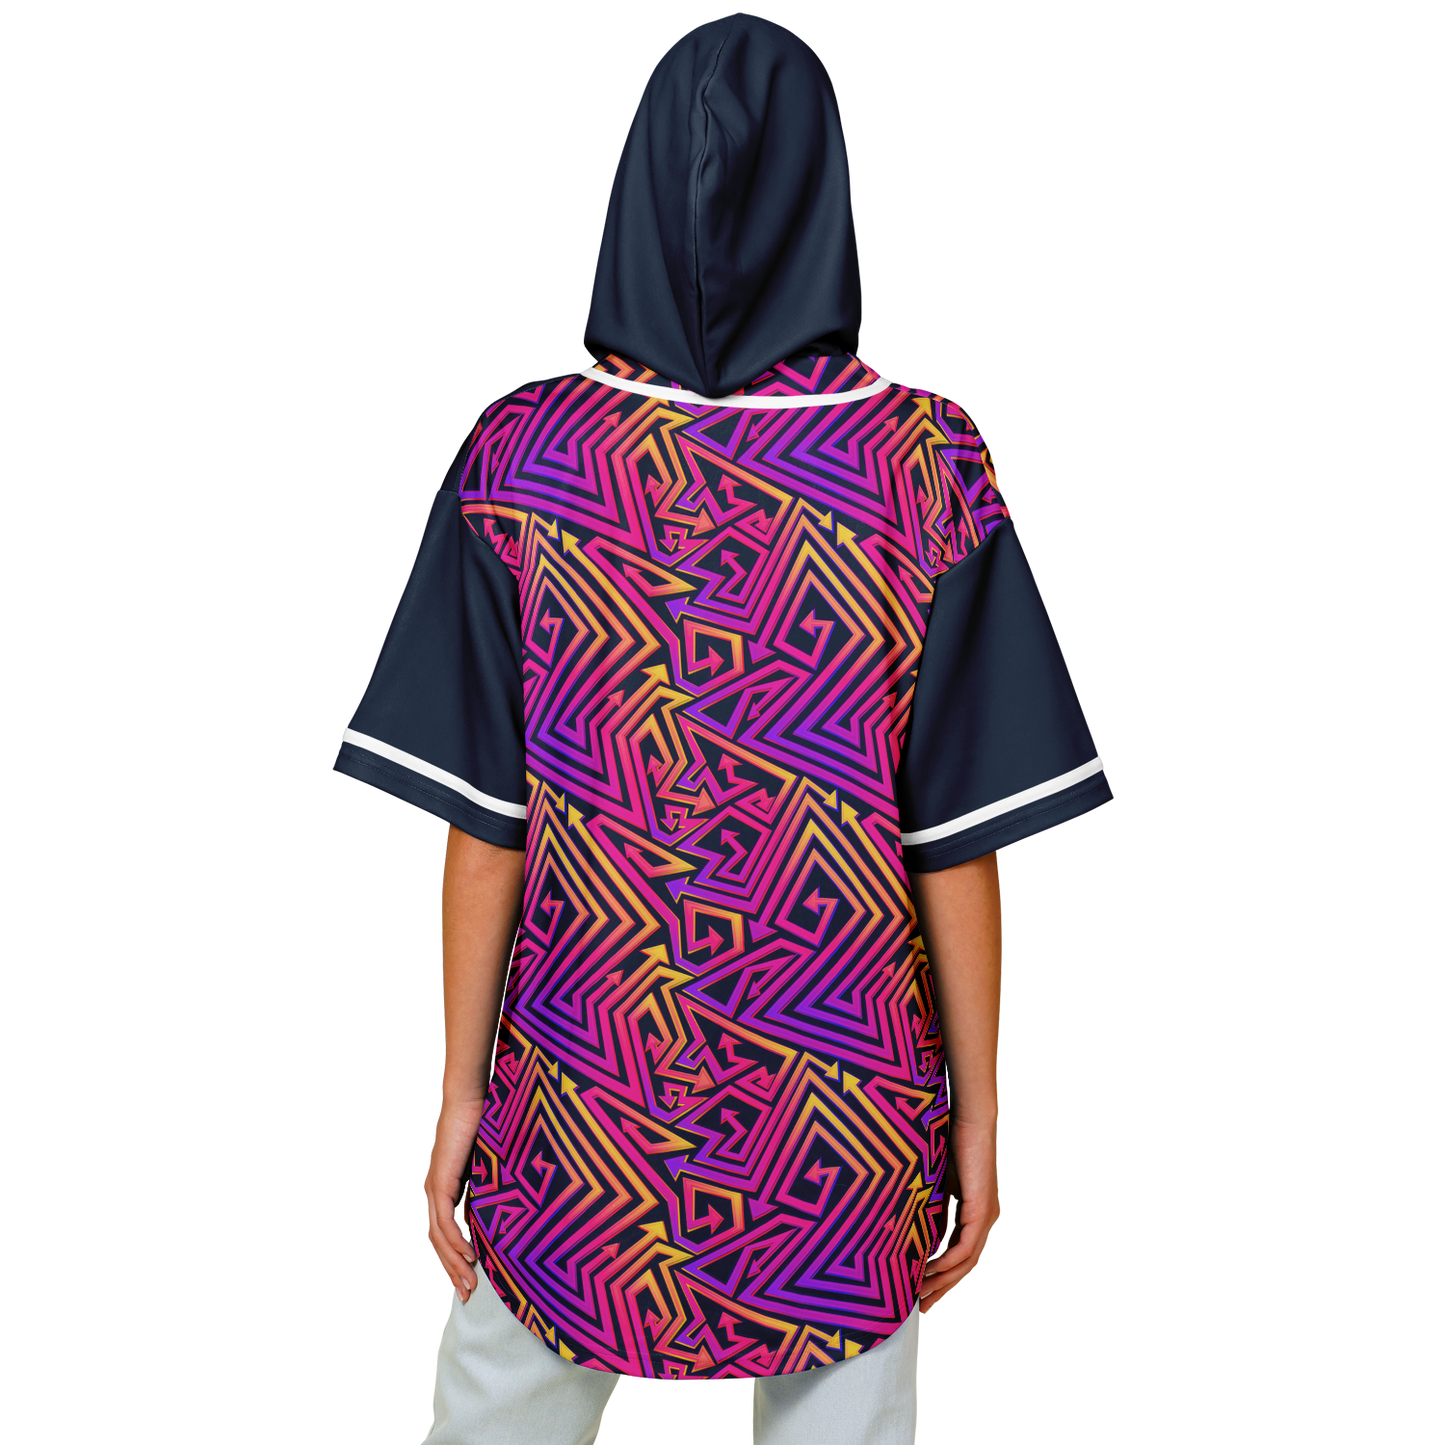 Which Way to the Rave Hooded Baseball Jersey copy